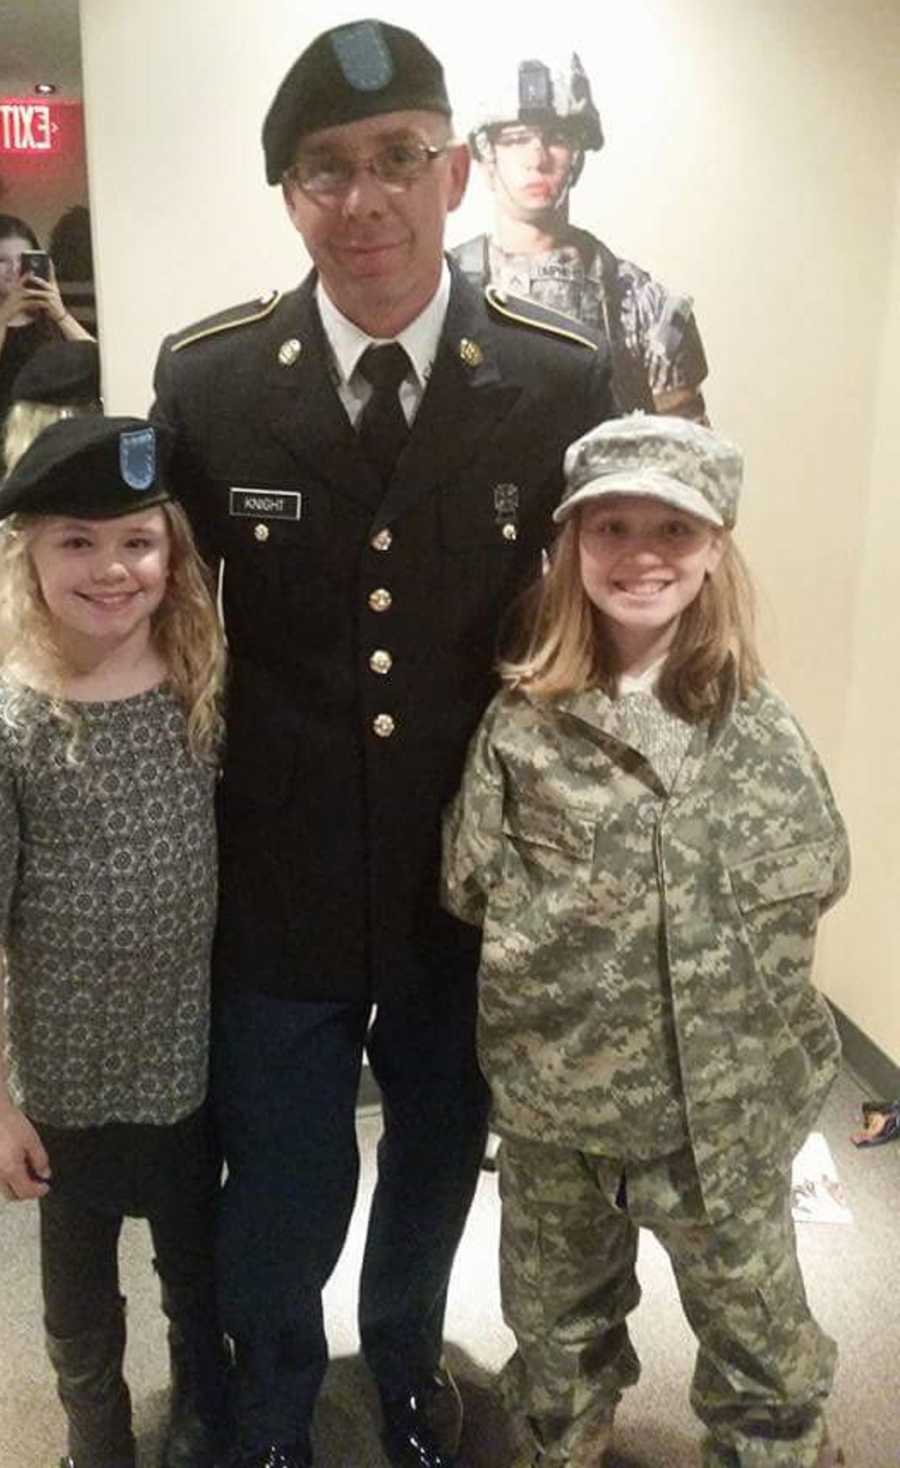 Army man stands in uniform with his arms around his wife's two daughters